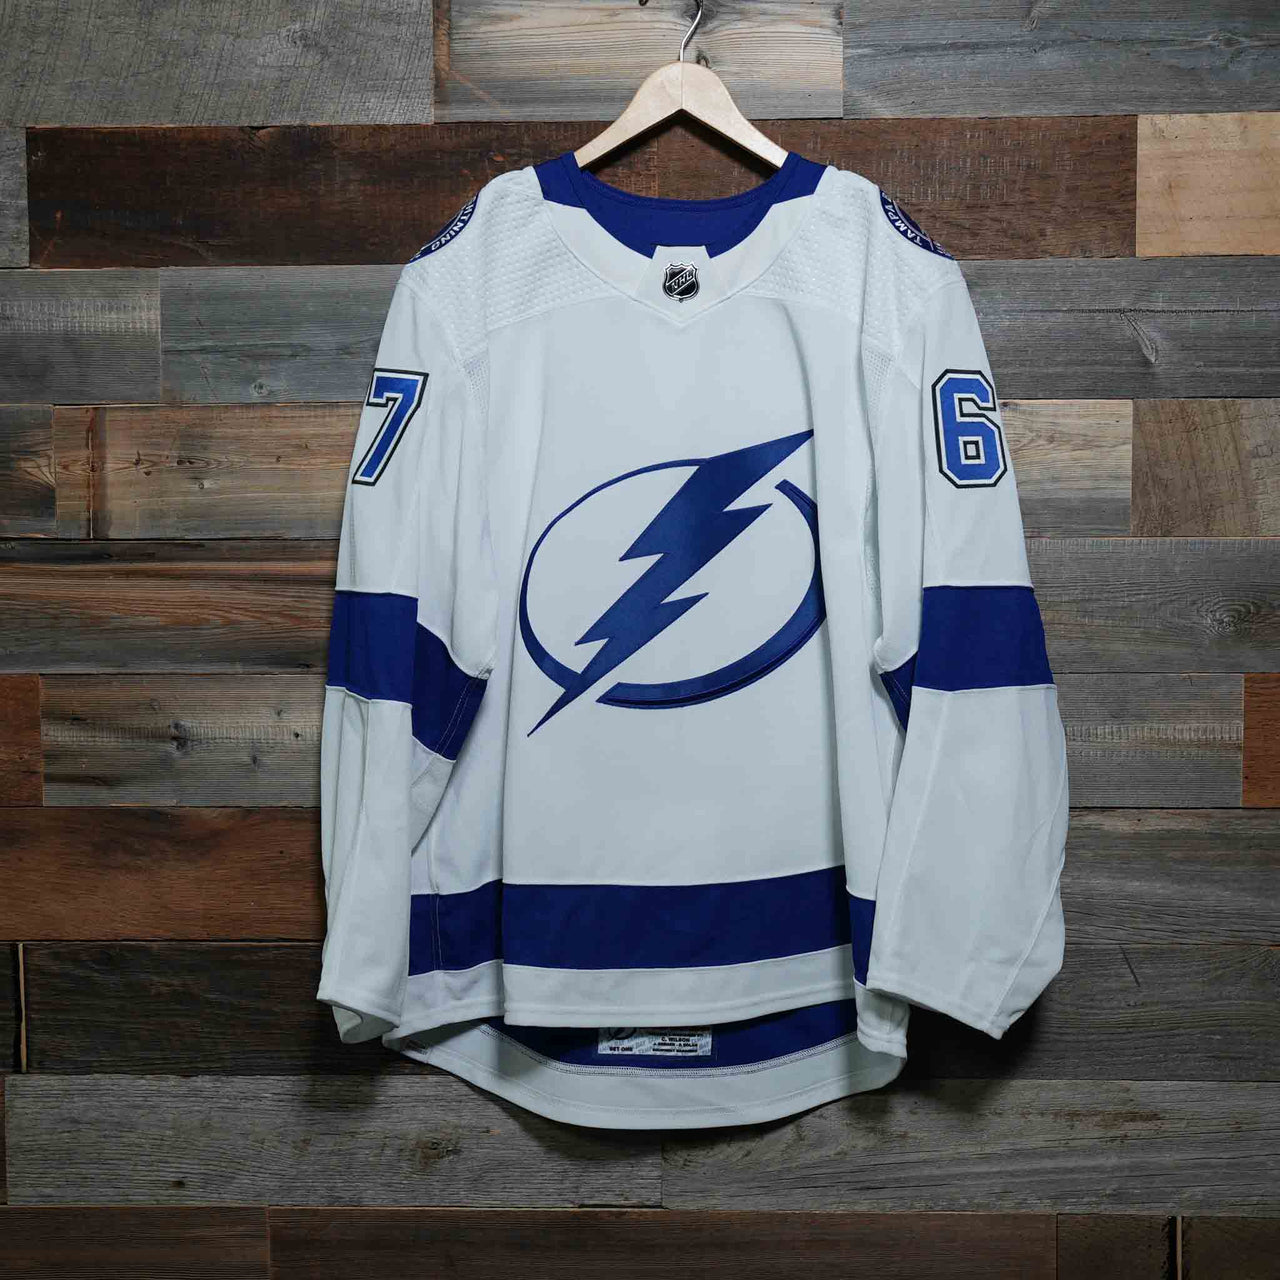 #67 WINSLOW 2021-22 Game-Issued Lightning Away Jersey (Size 56) Set 1